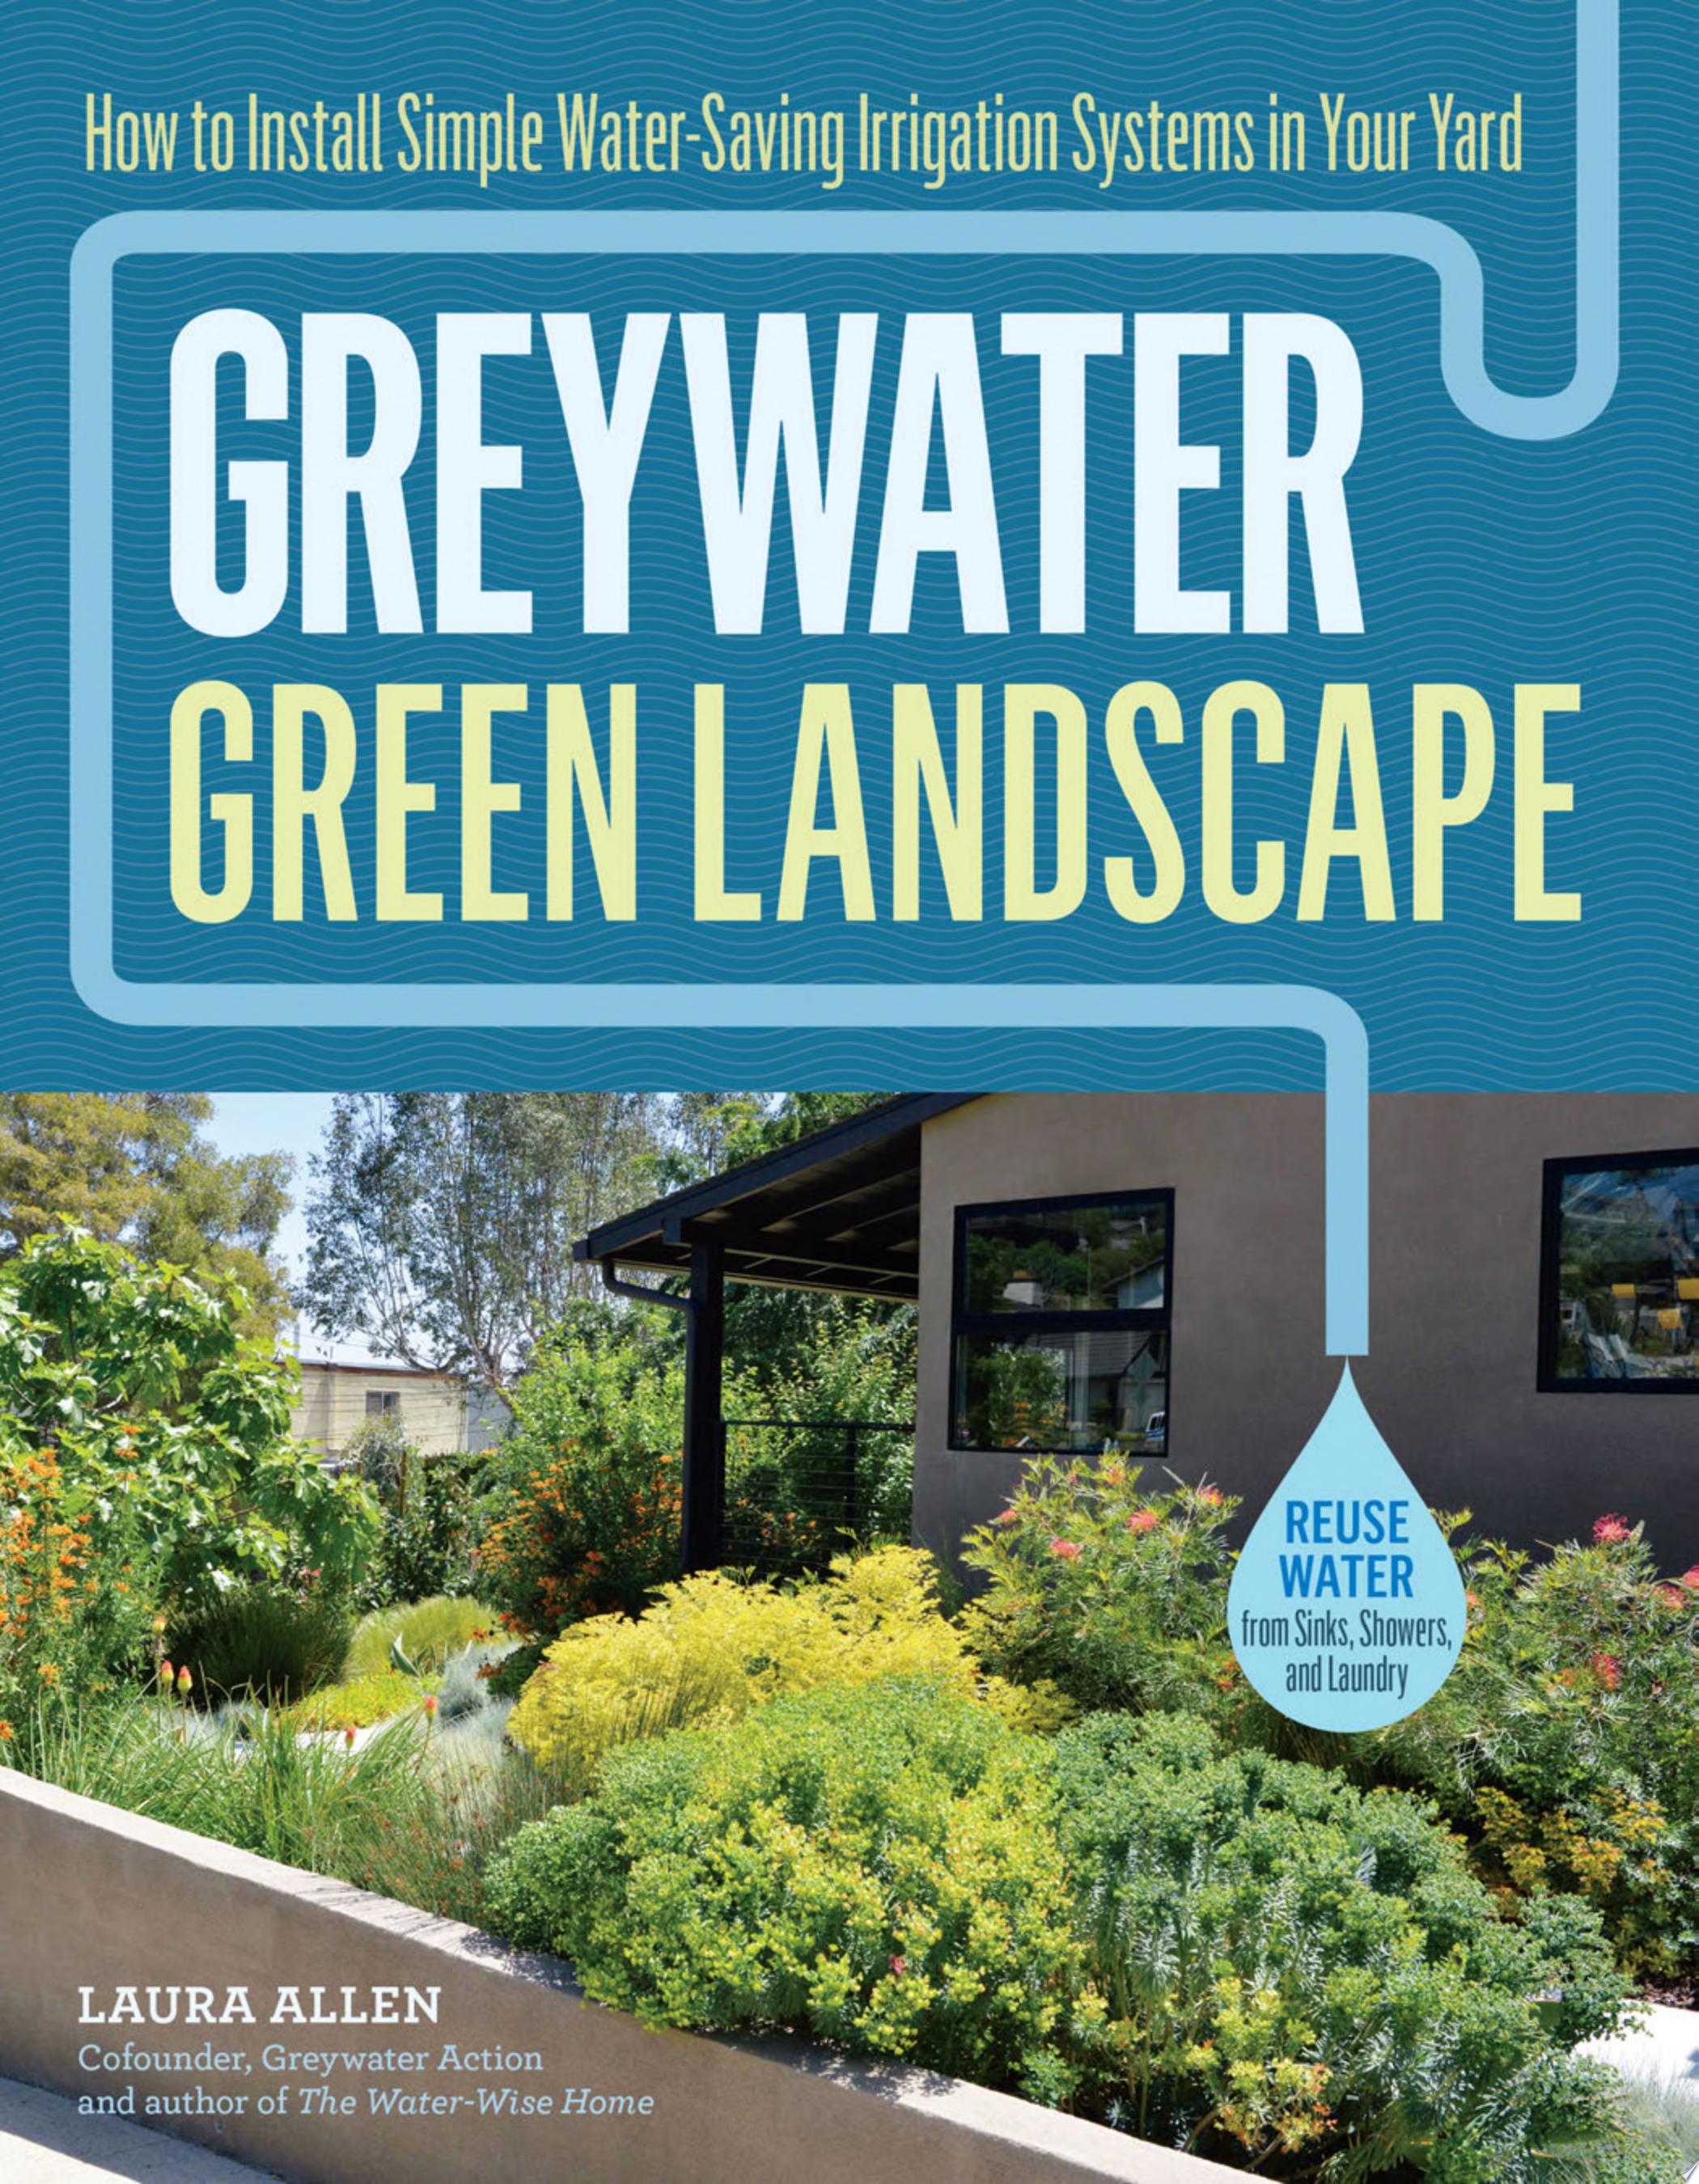 Image for "Greywater, Green Landscape"